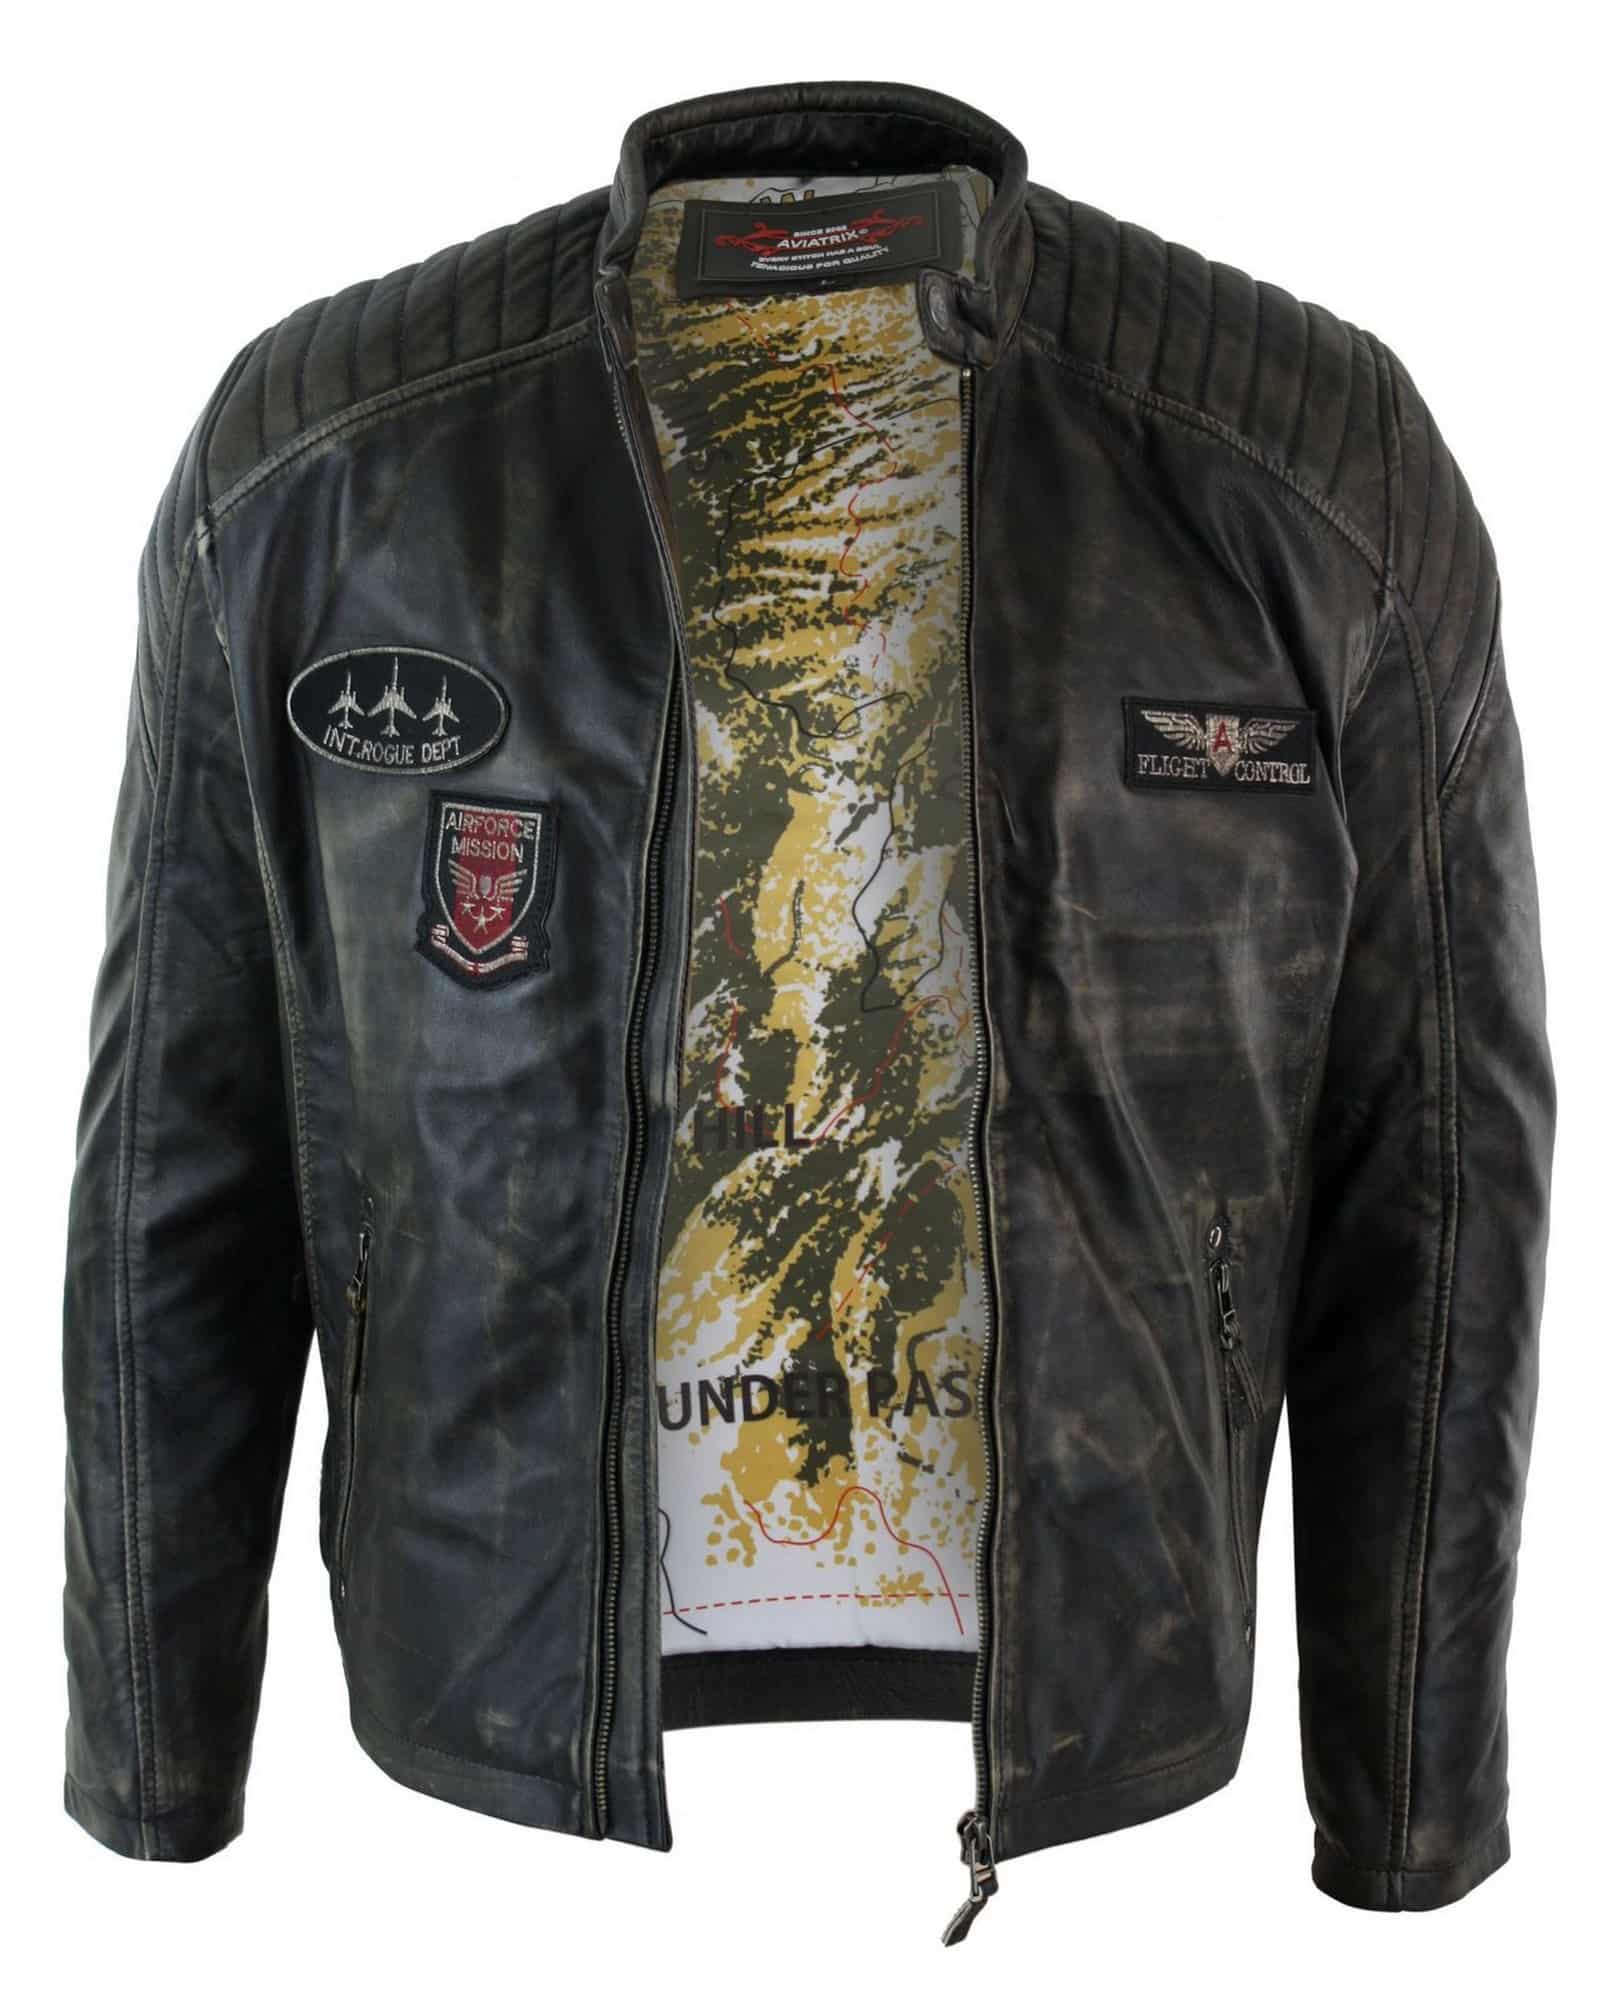 Mens Real Leather Washed Biker Airforce Jacket Distressed Casual Fit ...